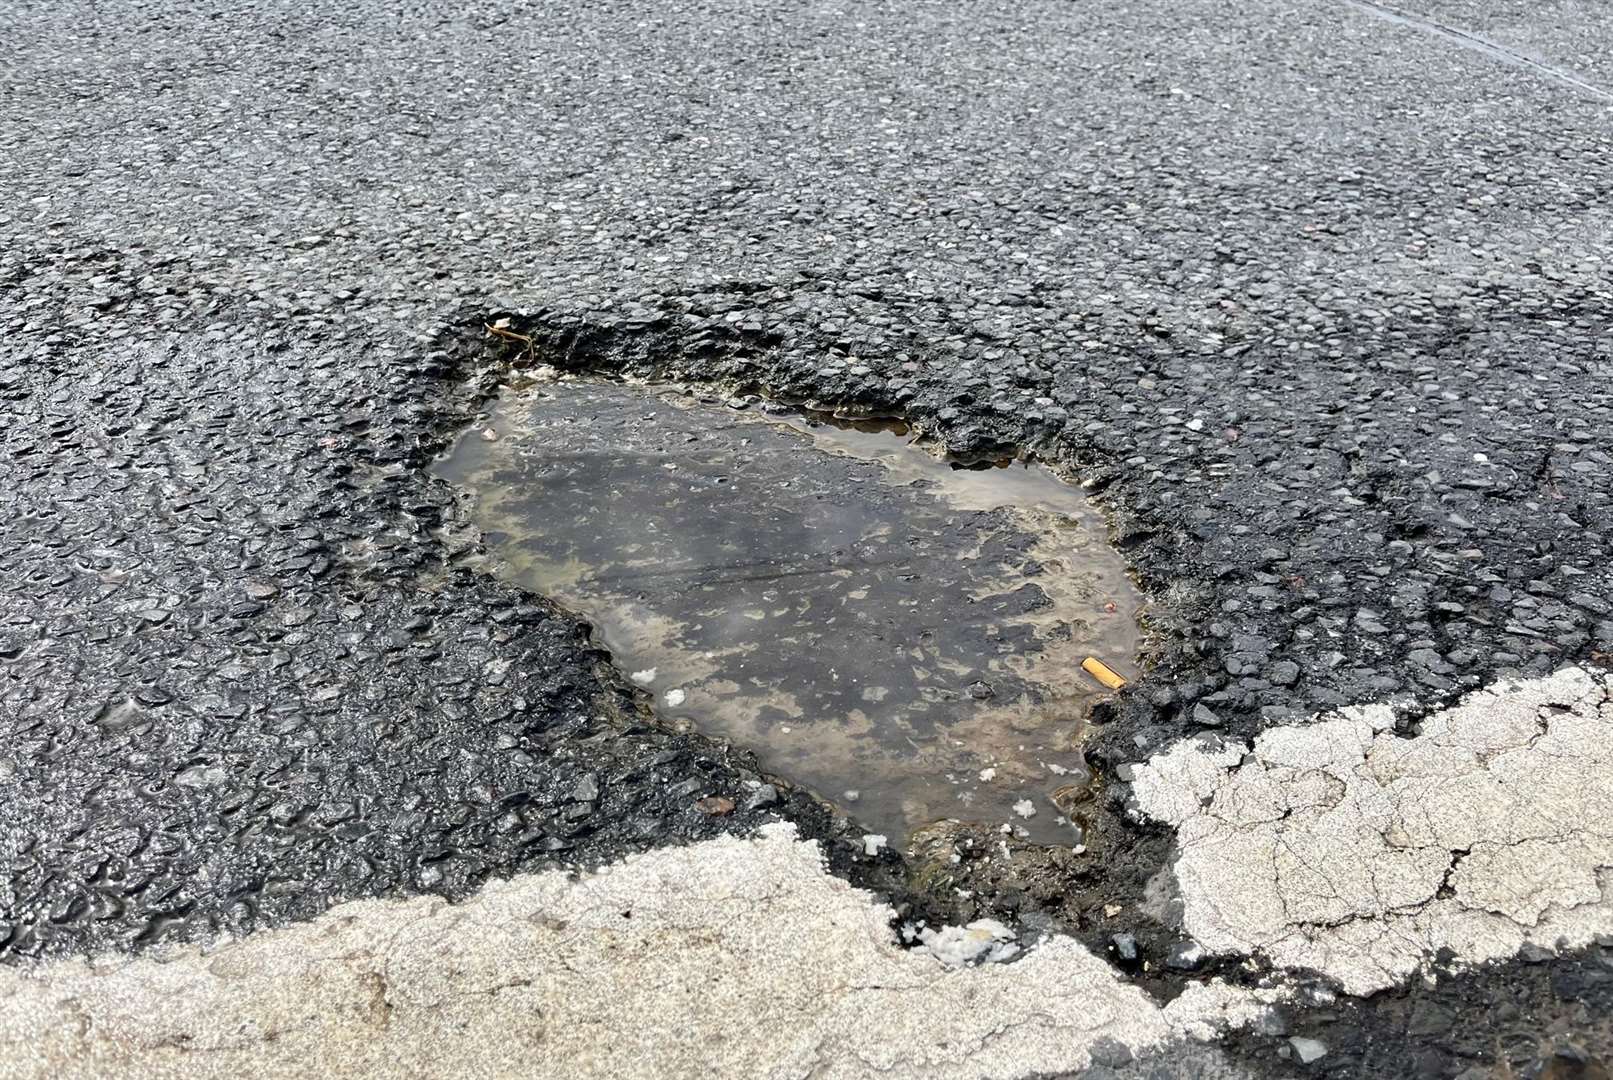 The government has granted millions to combat potholes in the South East